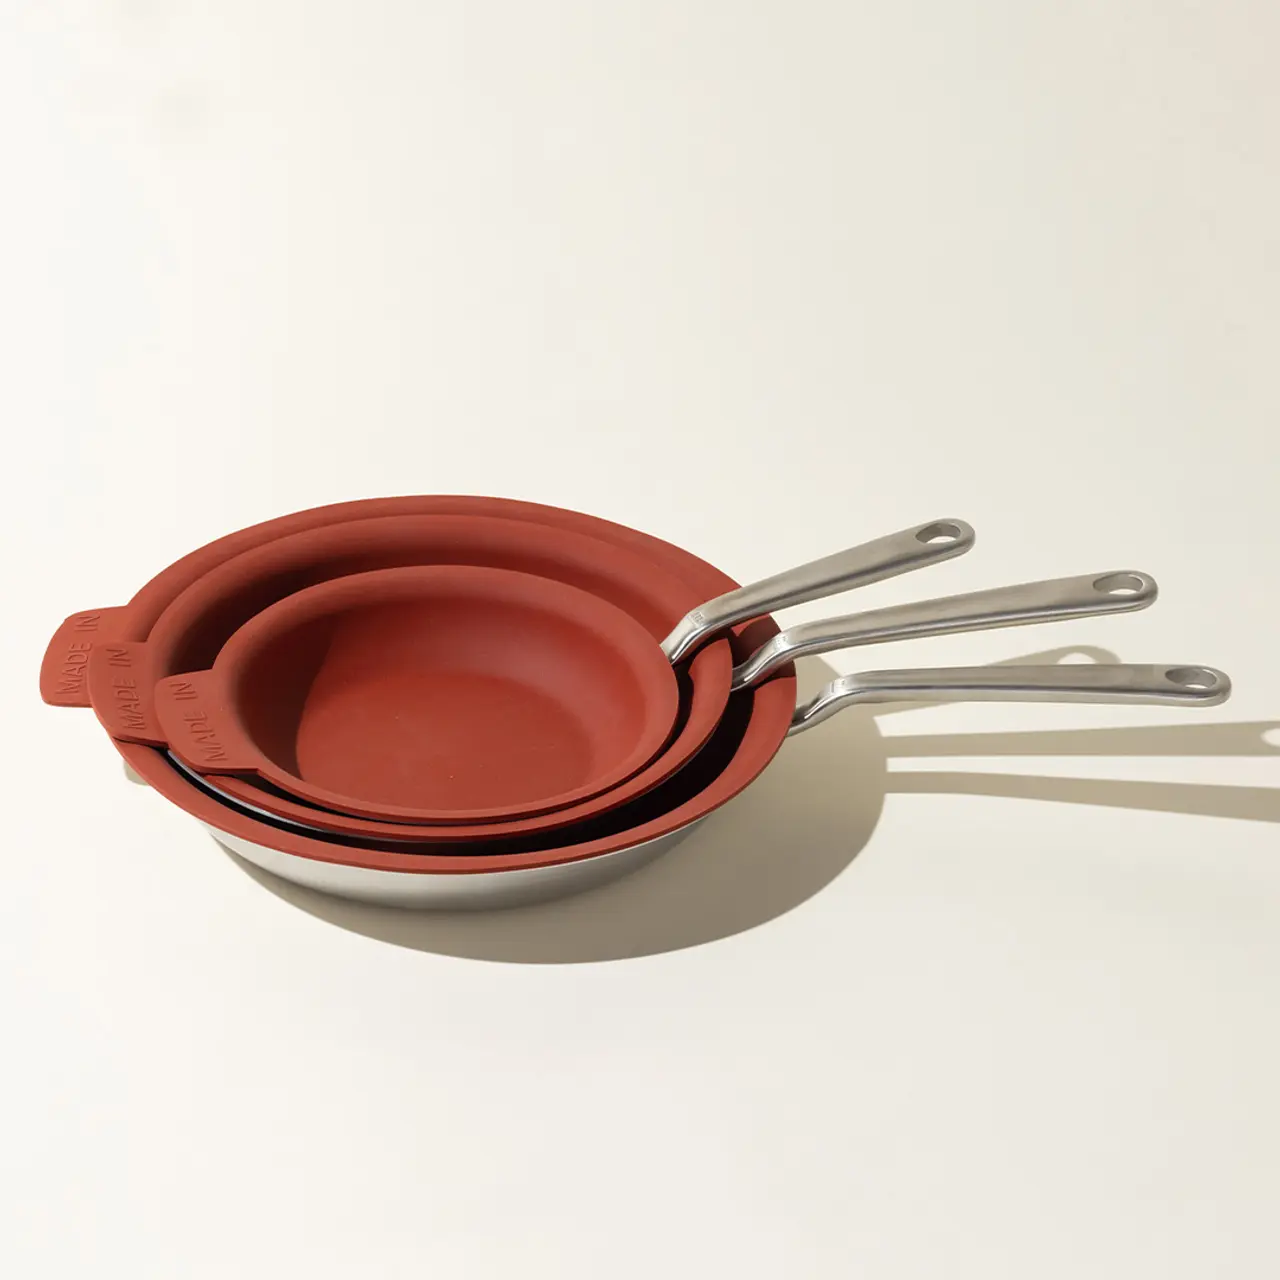 A stack of three red frying pans with silver handles casts a long shadow on a light surface.